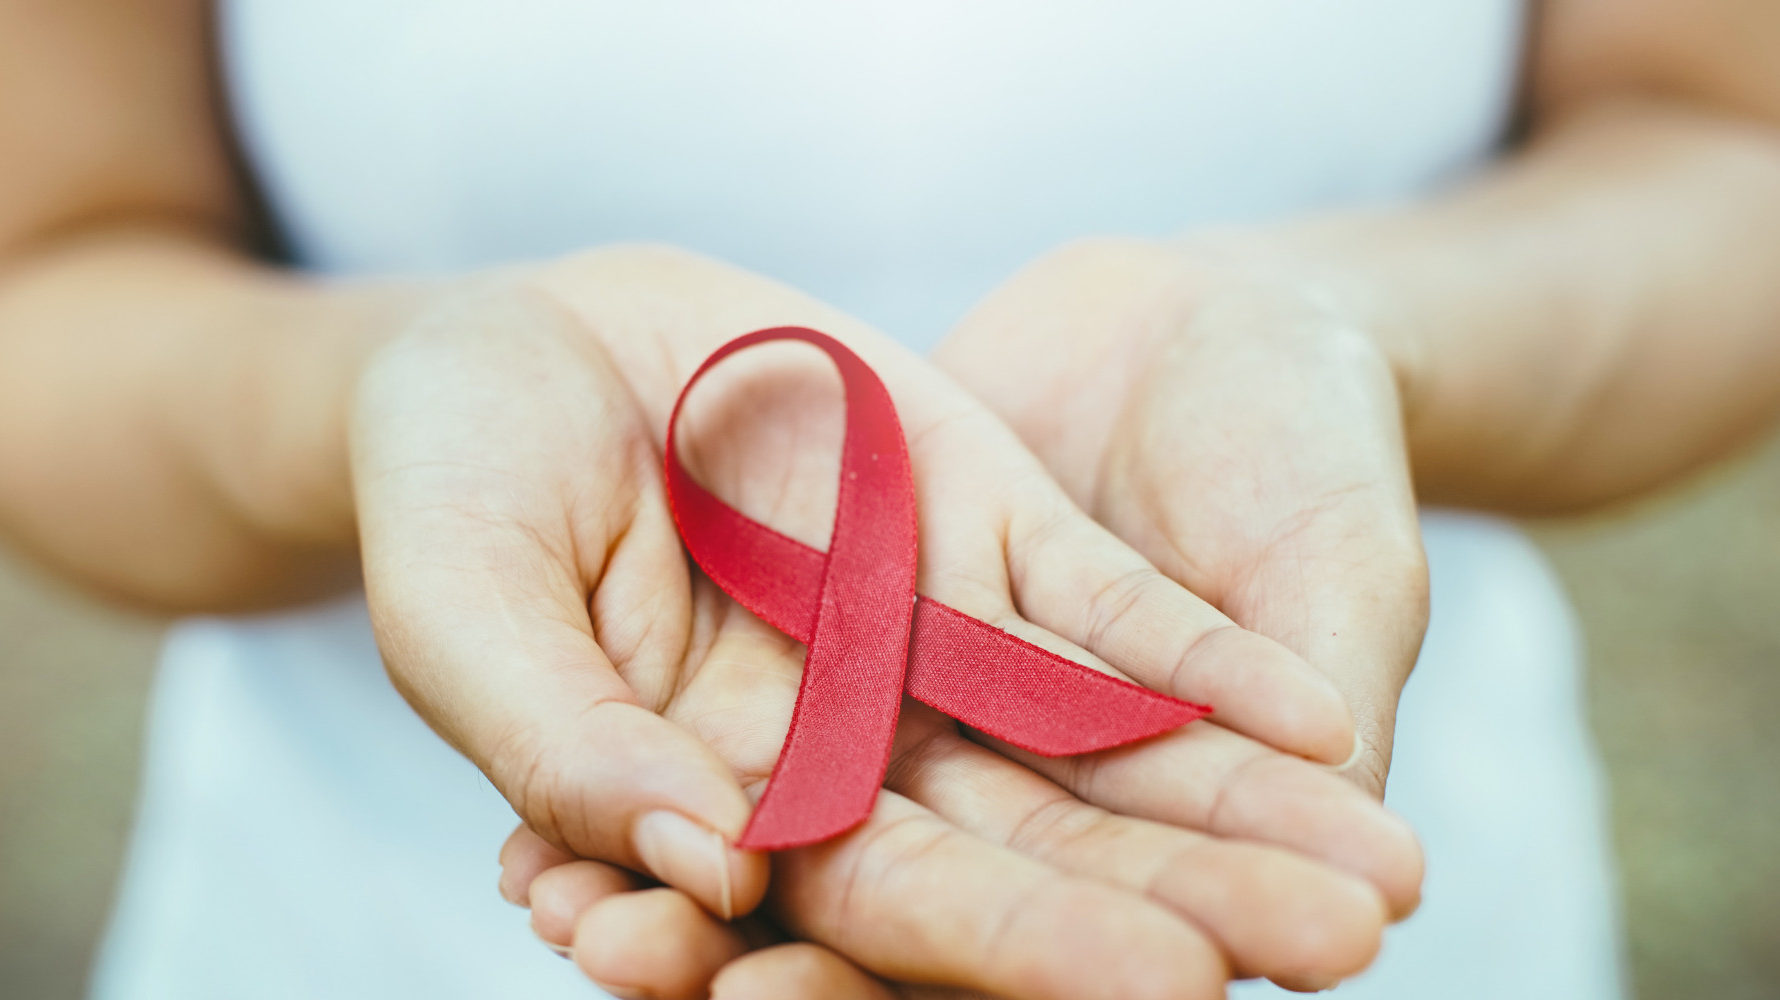 Cure for HIV AIDS Foundation for AIDS Research claims that Cure will be Out in 2020